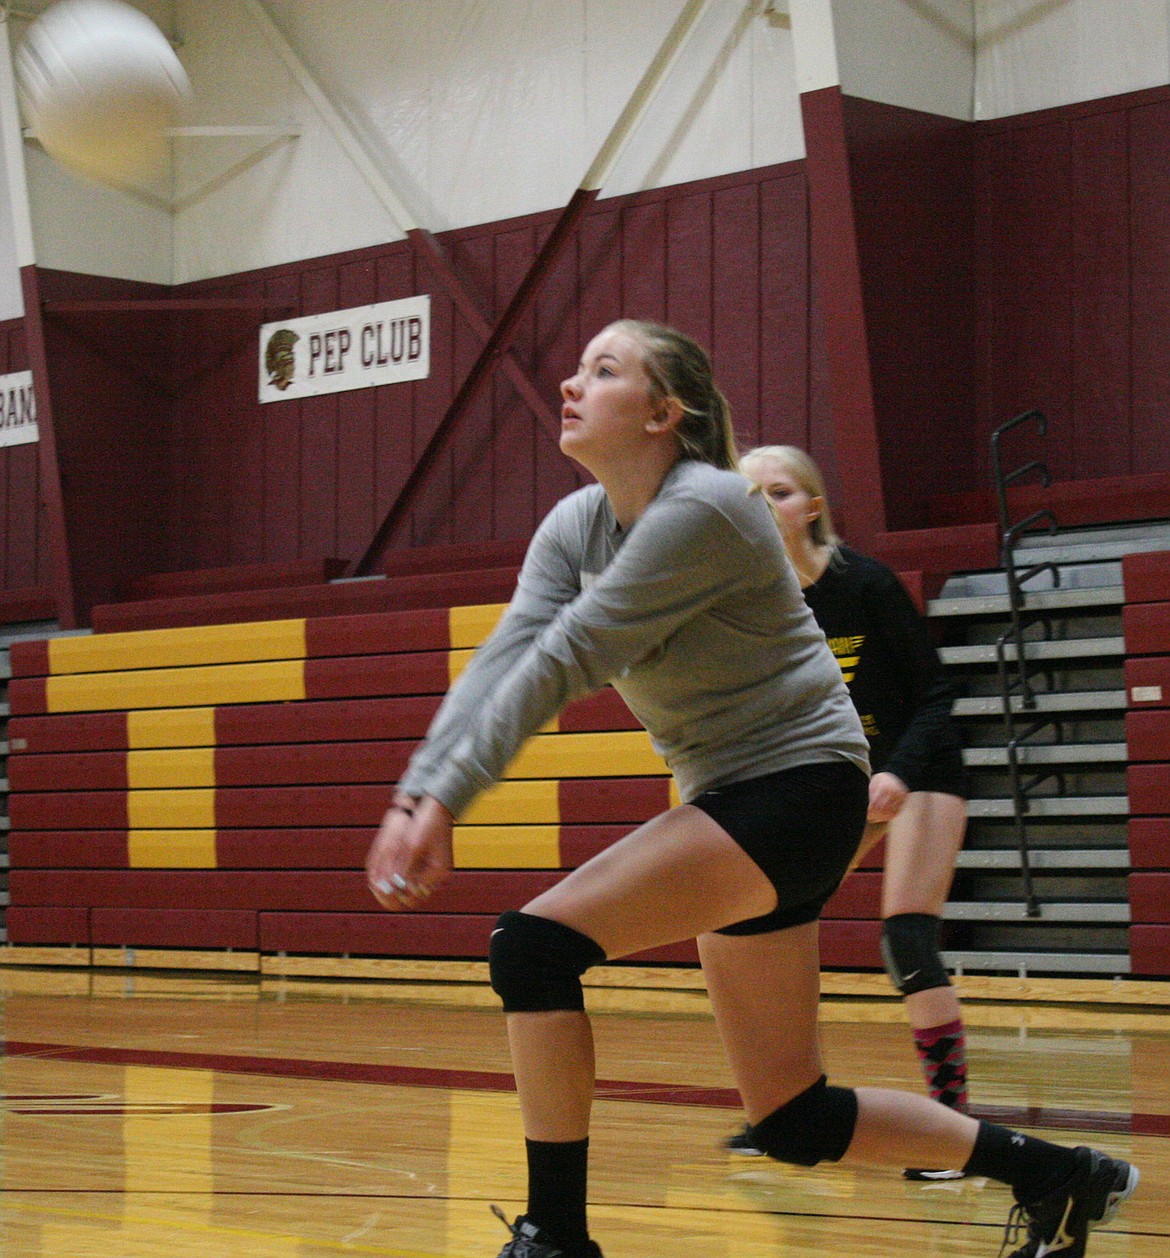 Troy High Schooler Katelynn Tallmadge goes for the ball during a drill at the first volleyball practise of the saeson on Aug. 11. (Elka Wood/The Western News)